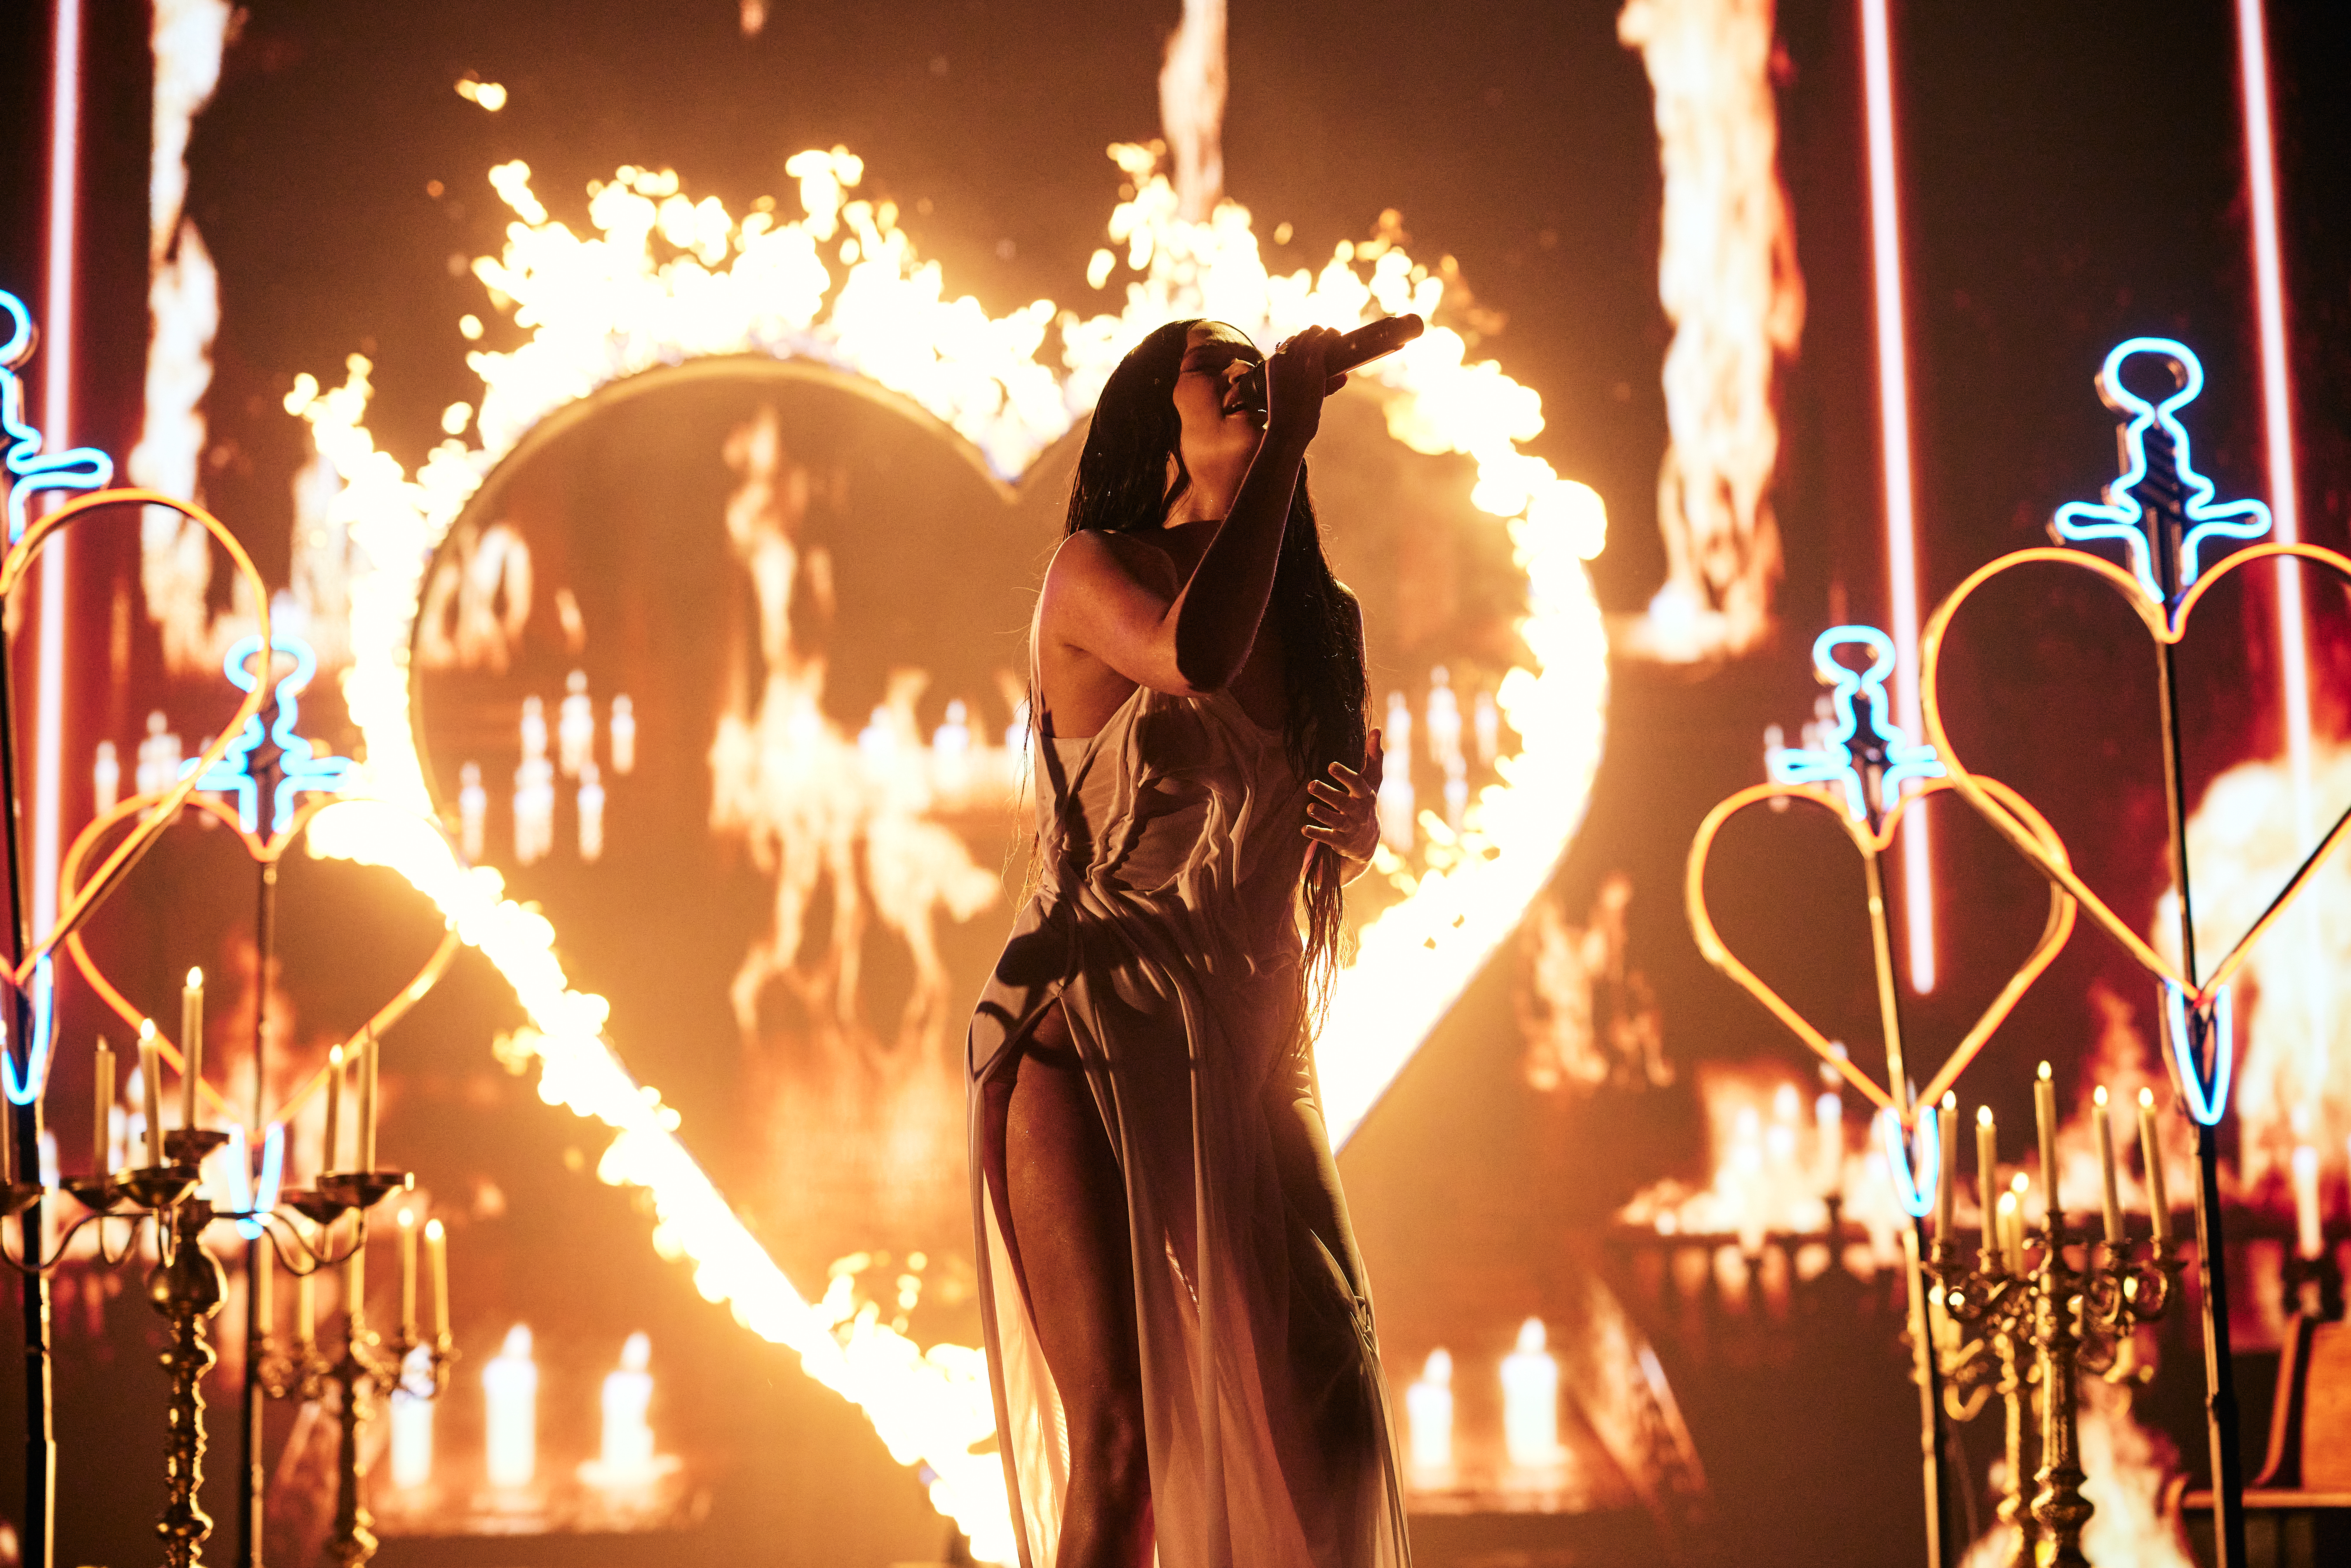 Singer Kacey Musgraves performs onstage at the 2021 MTV Video Music Awards in front of a heart shape outlined by fire.